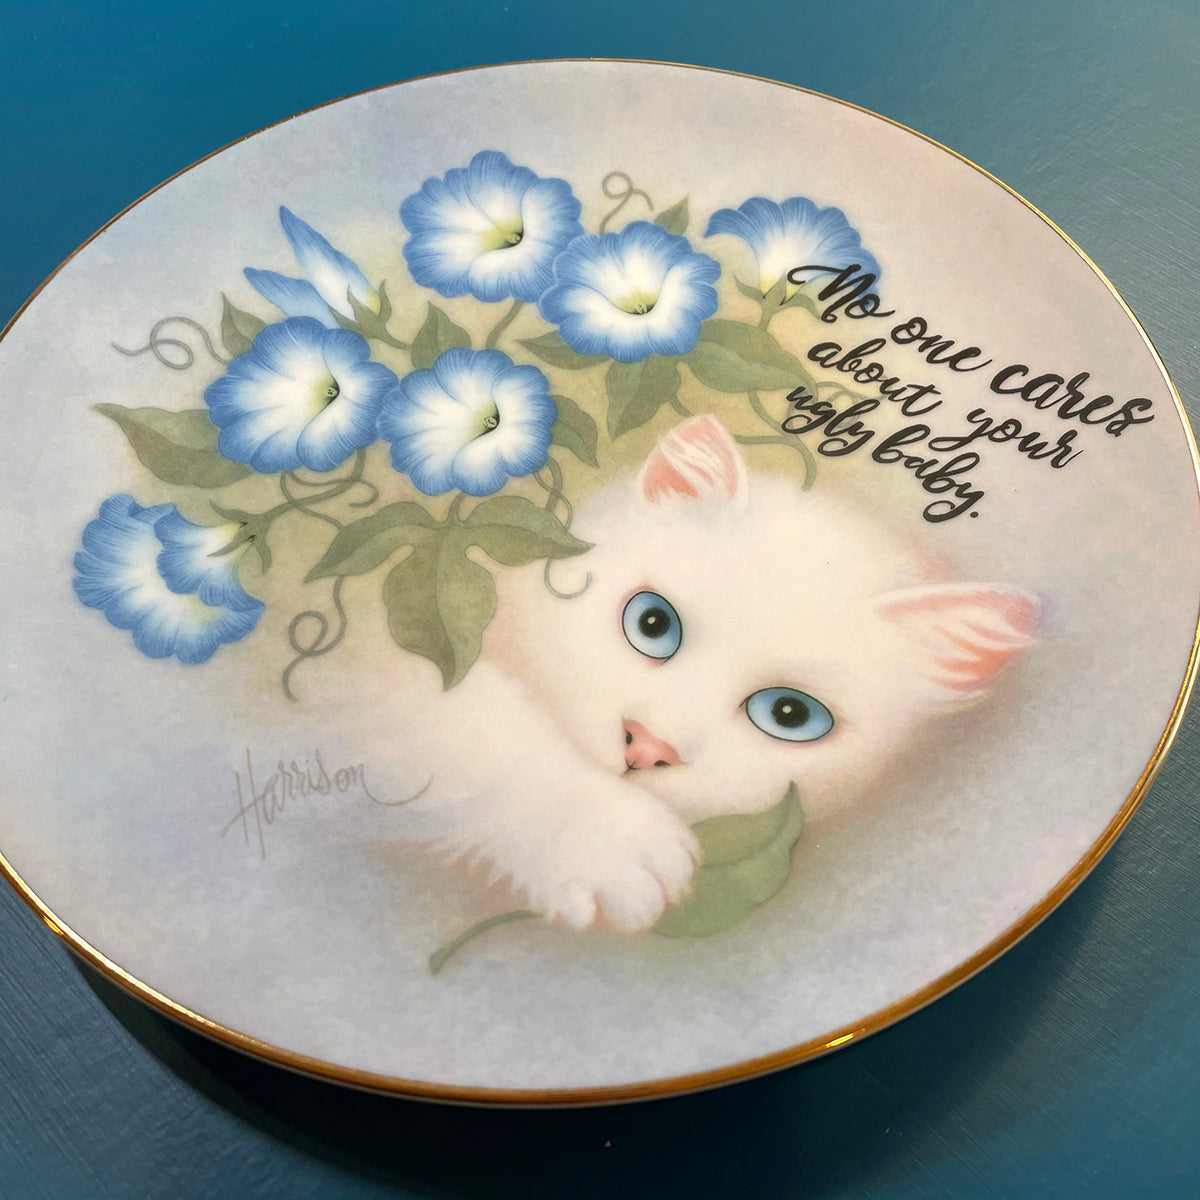 Vintage Art Plate - Cat plate  - "No one cares about your ugly baby."